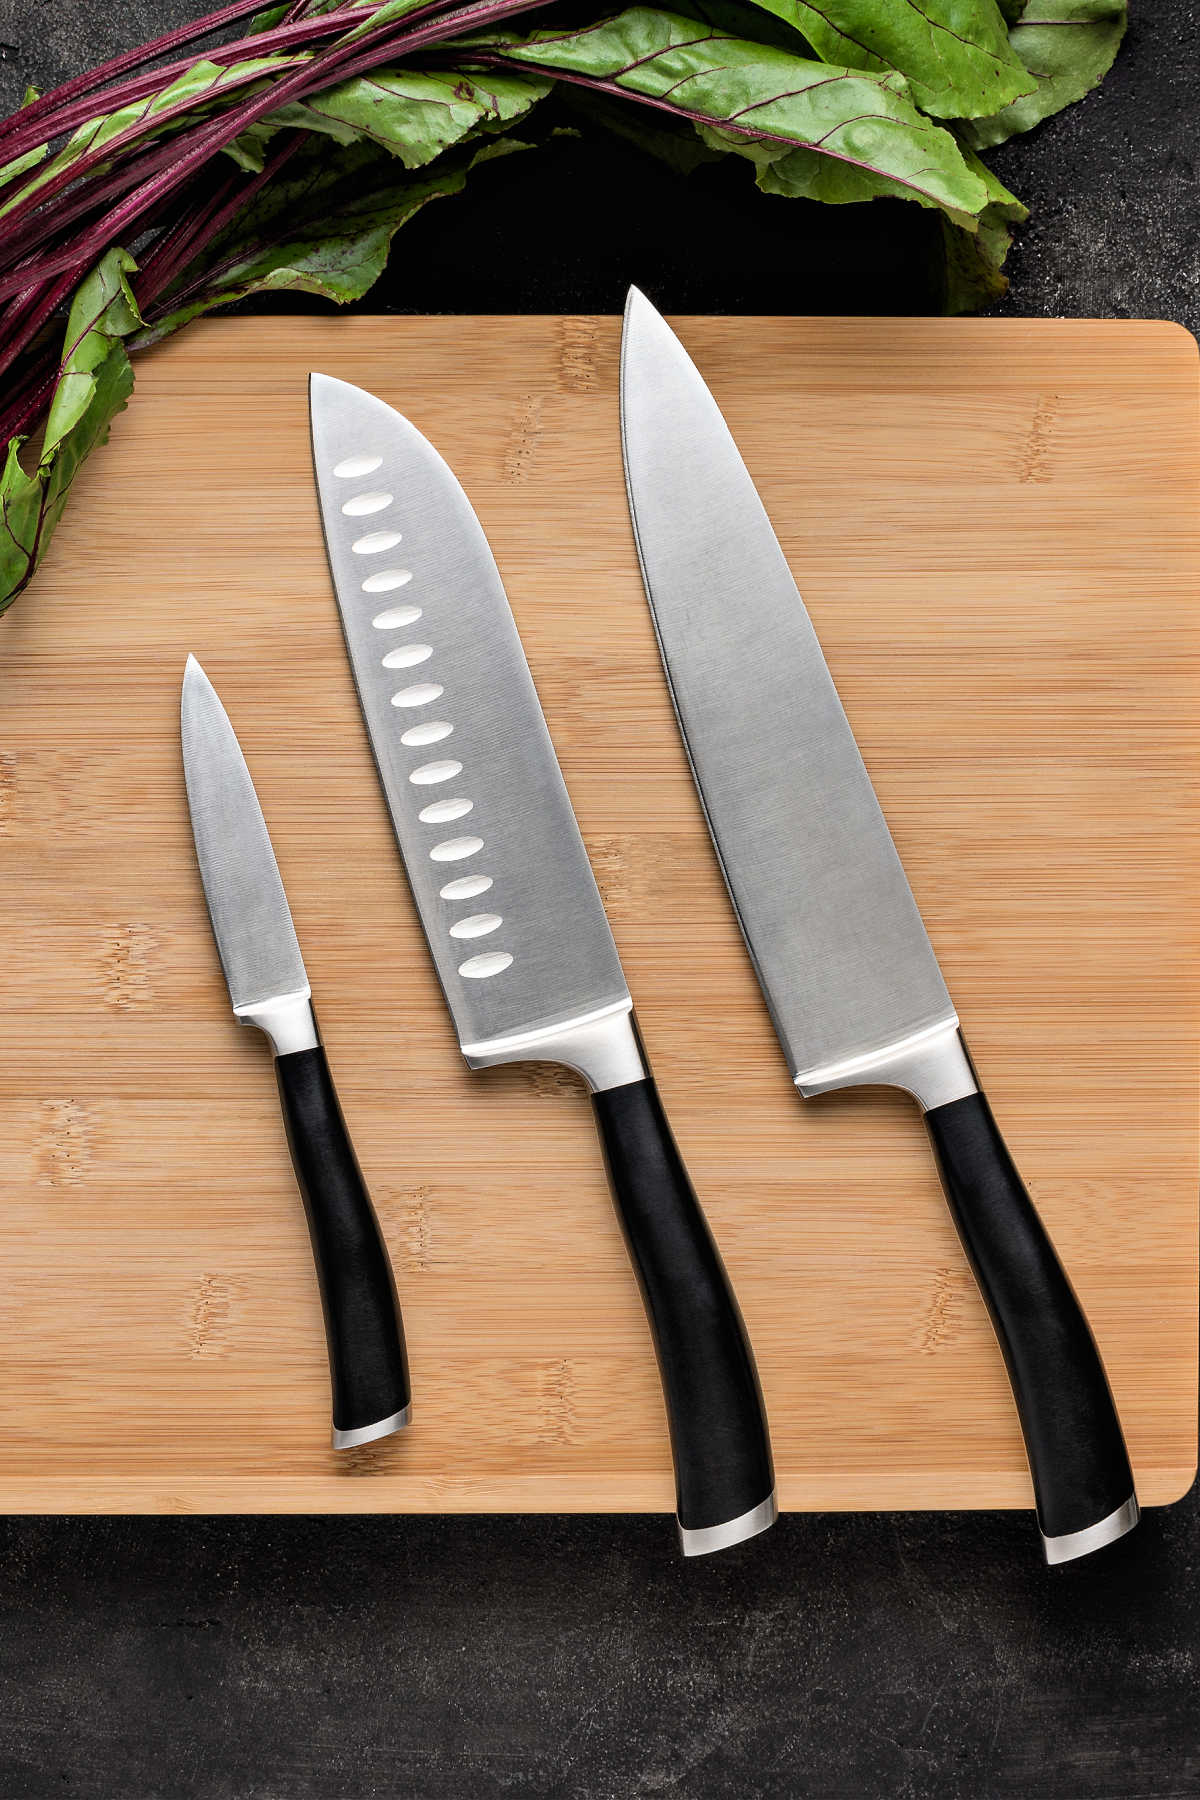 An overhead shot of 3 kitchen knives on a cutting board.